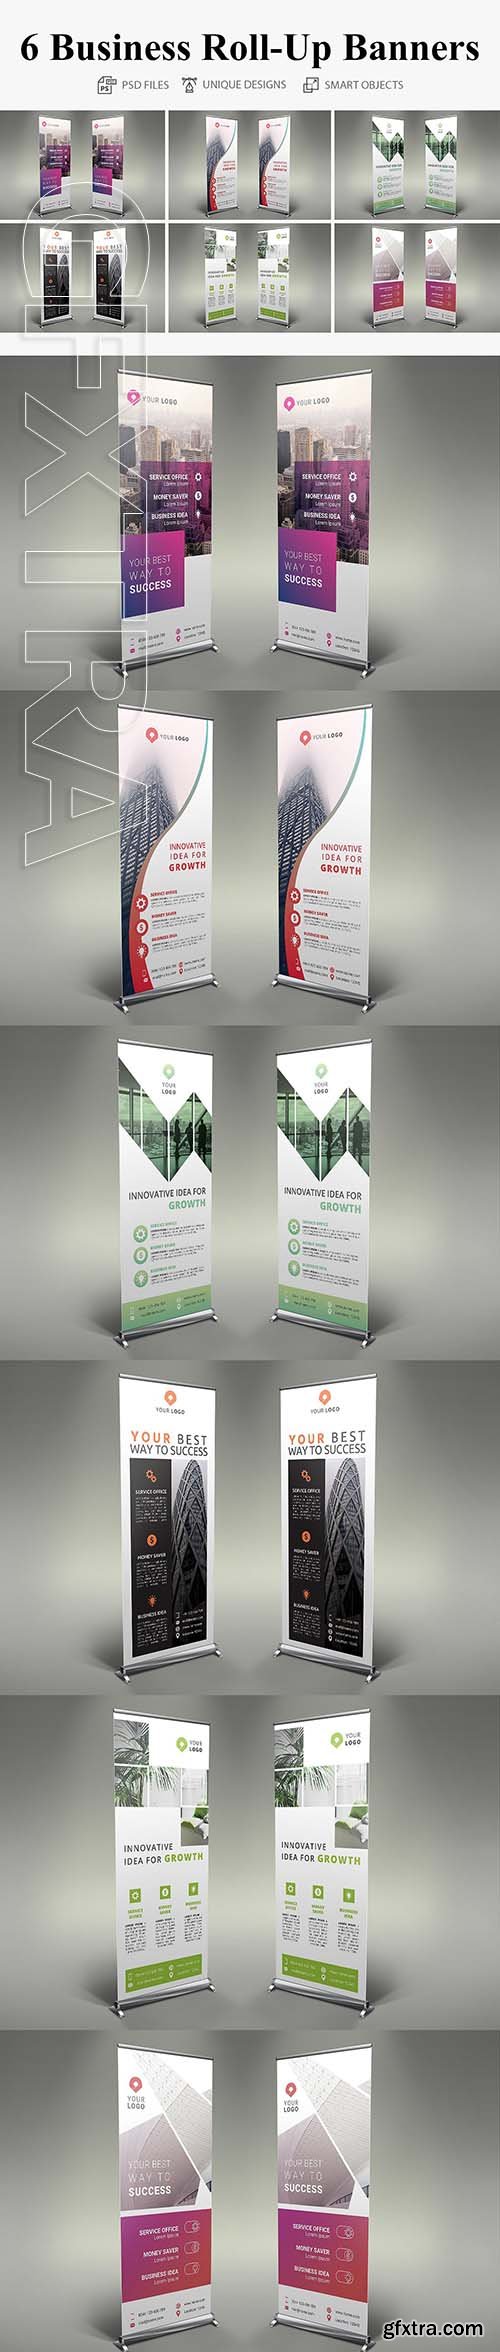 CreativeMarket - 6 Business Roll Up Banners 2708038